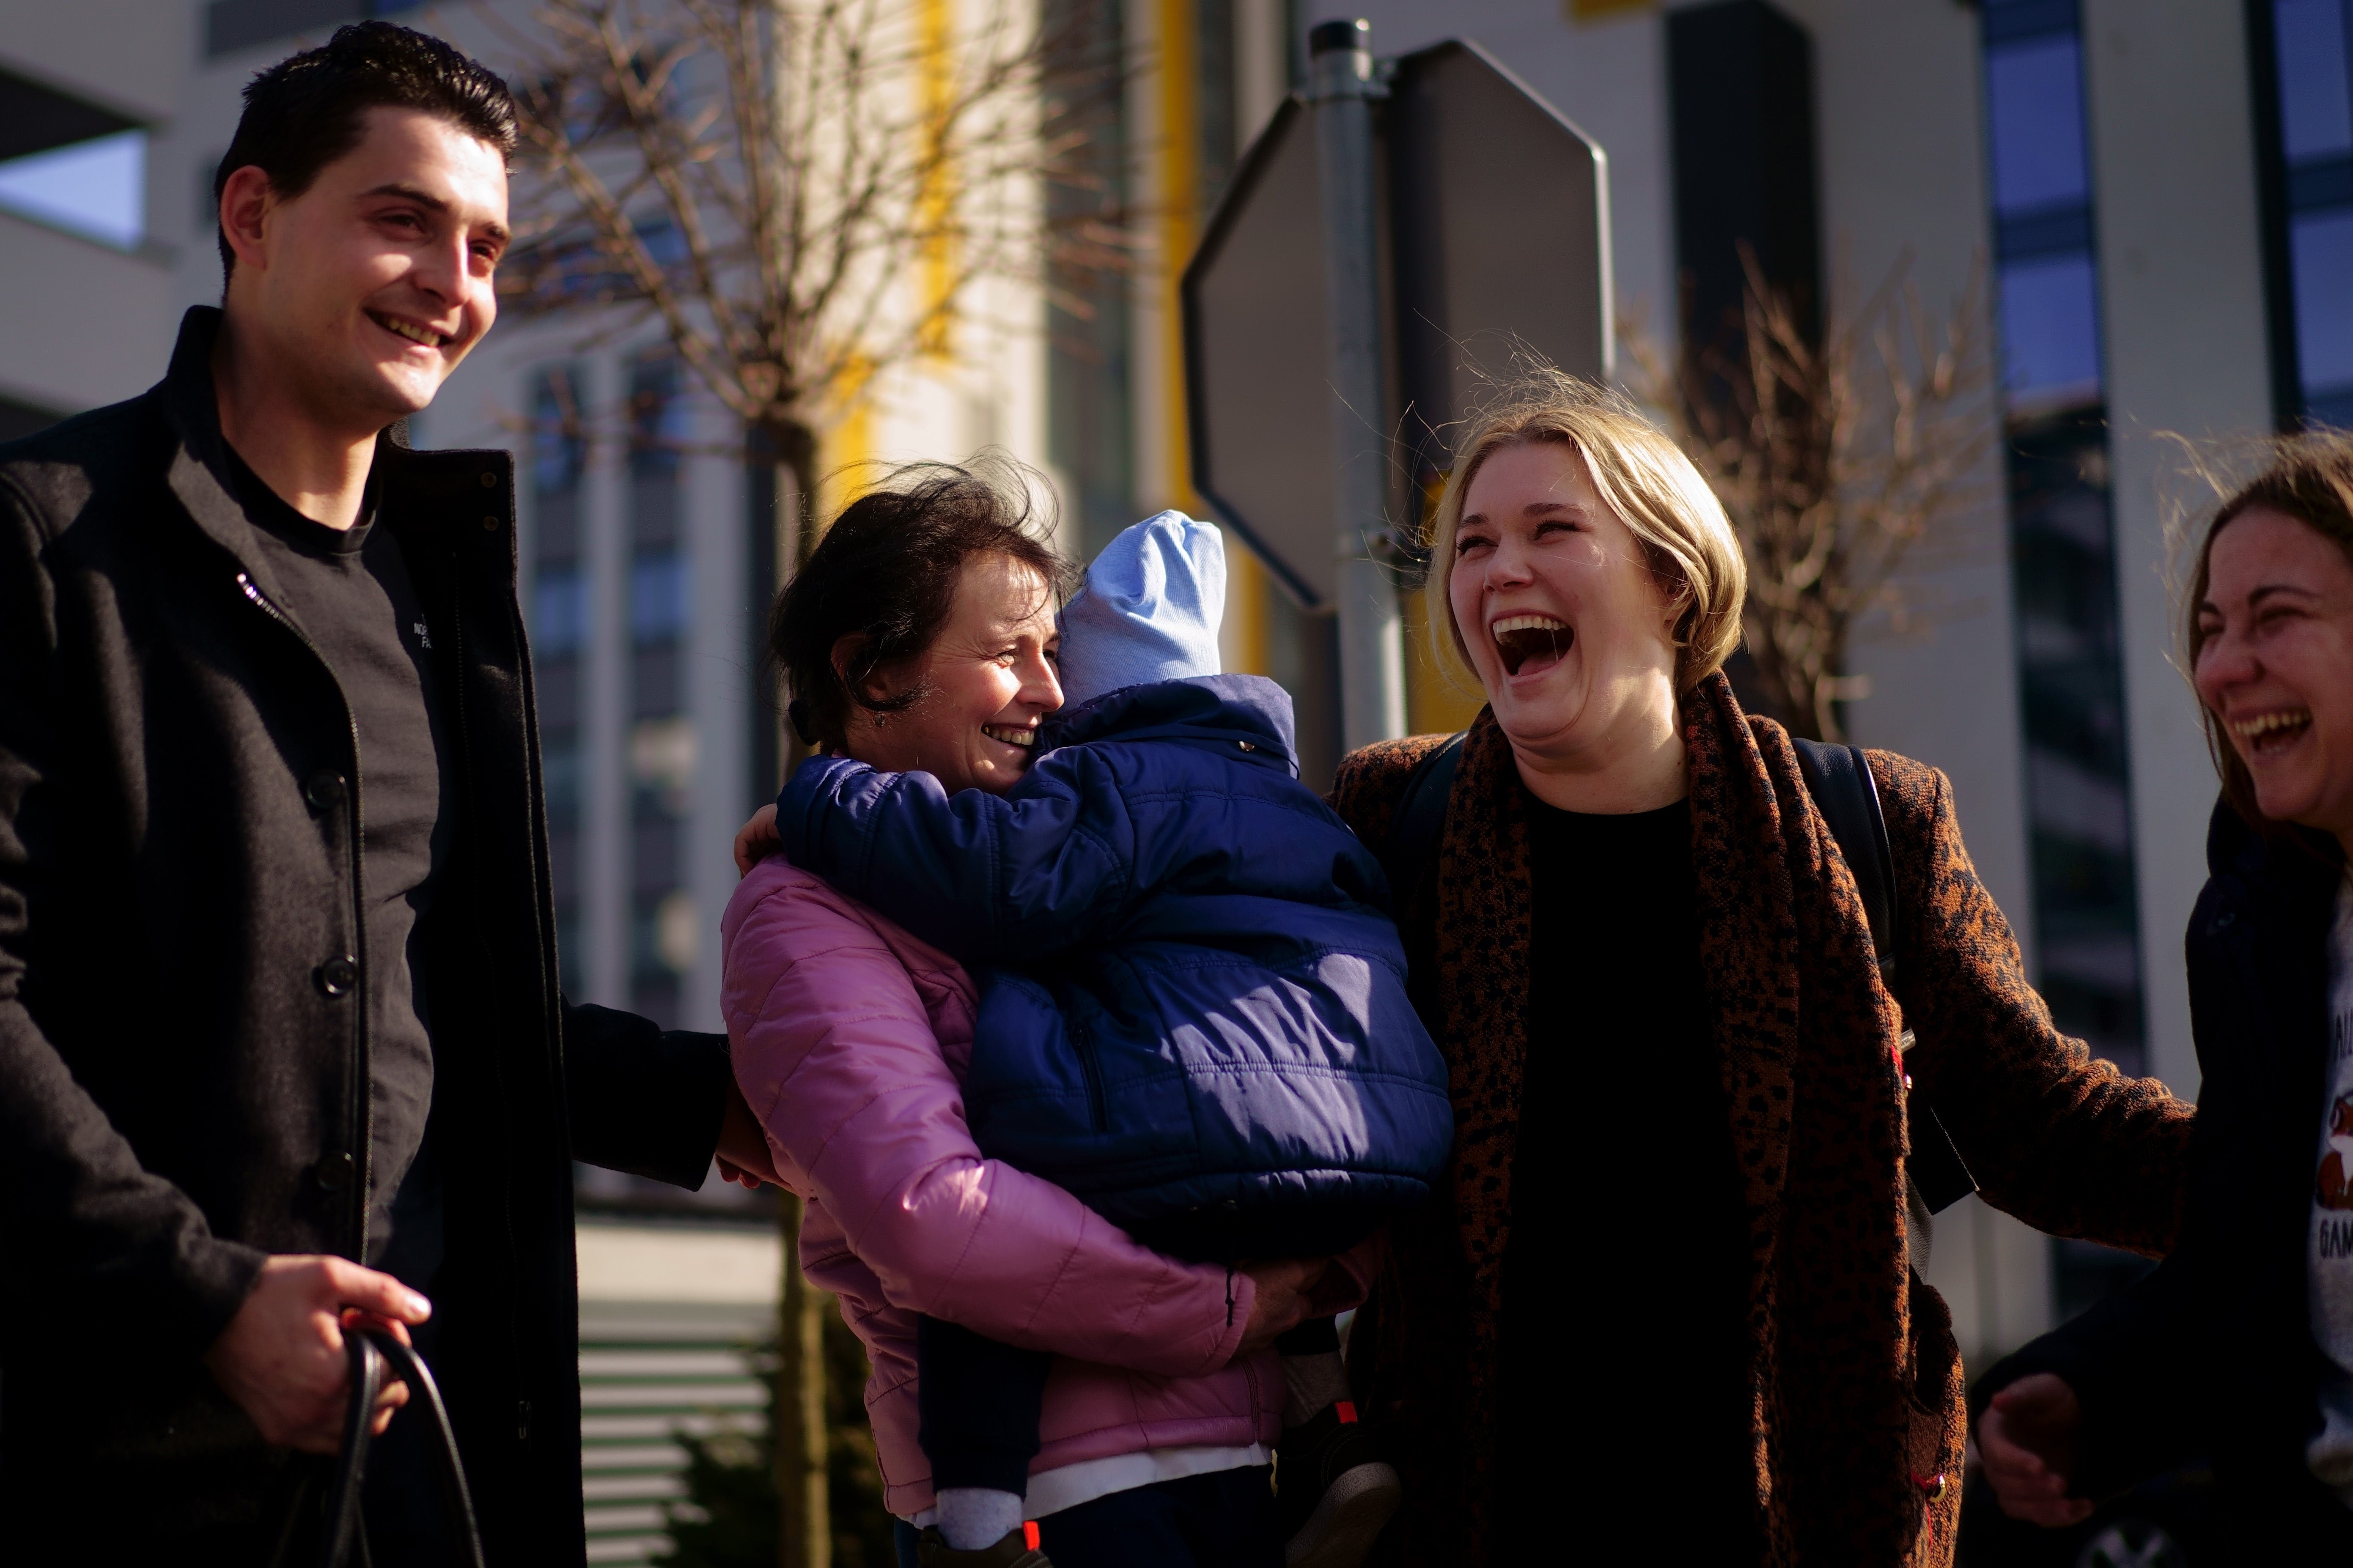 The family were reunited outside a visa office in Rzeszow, Poland